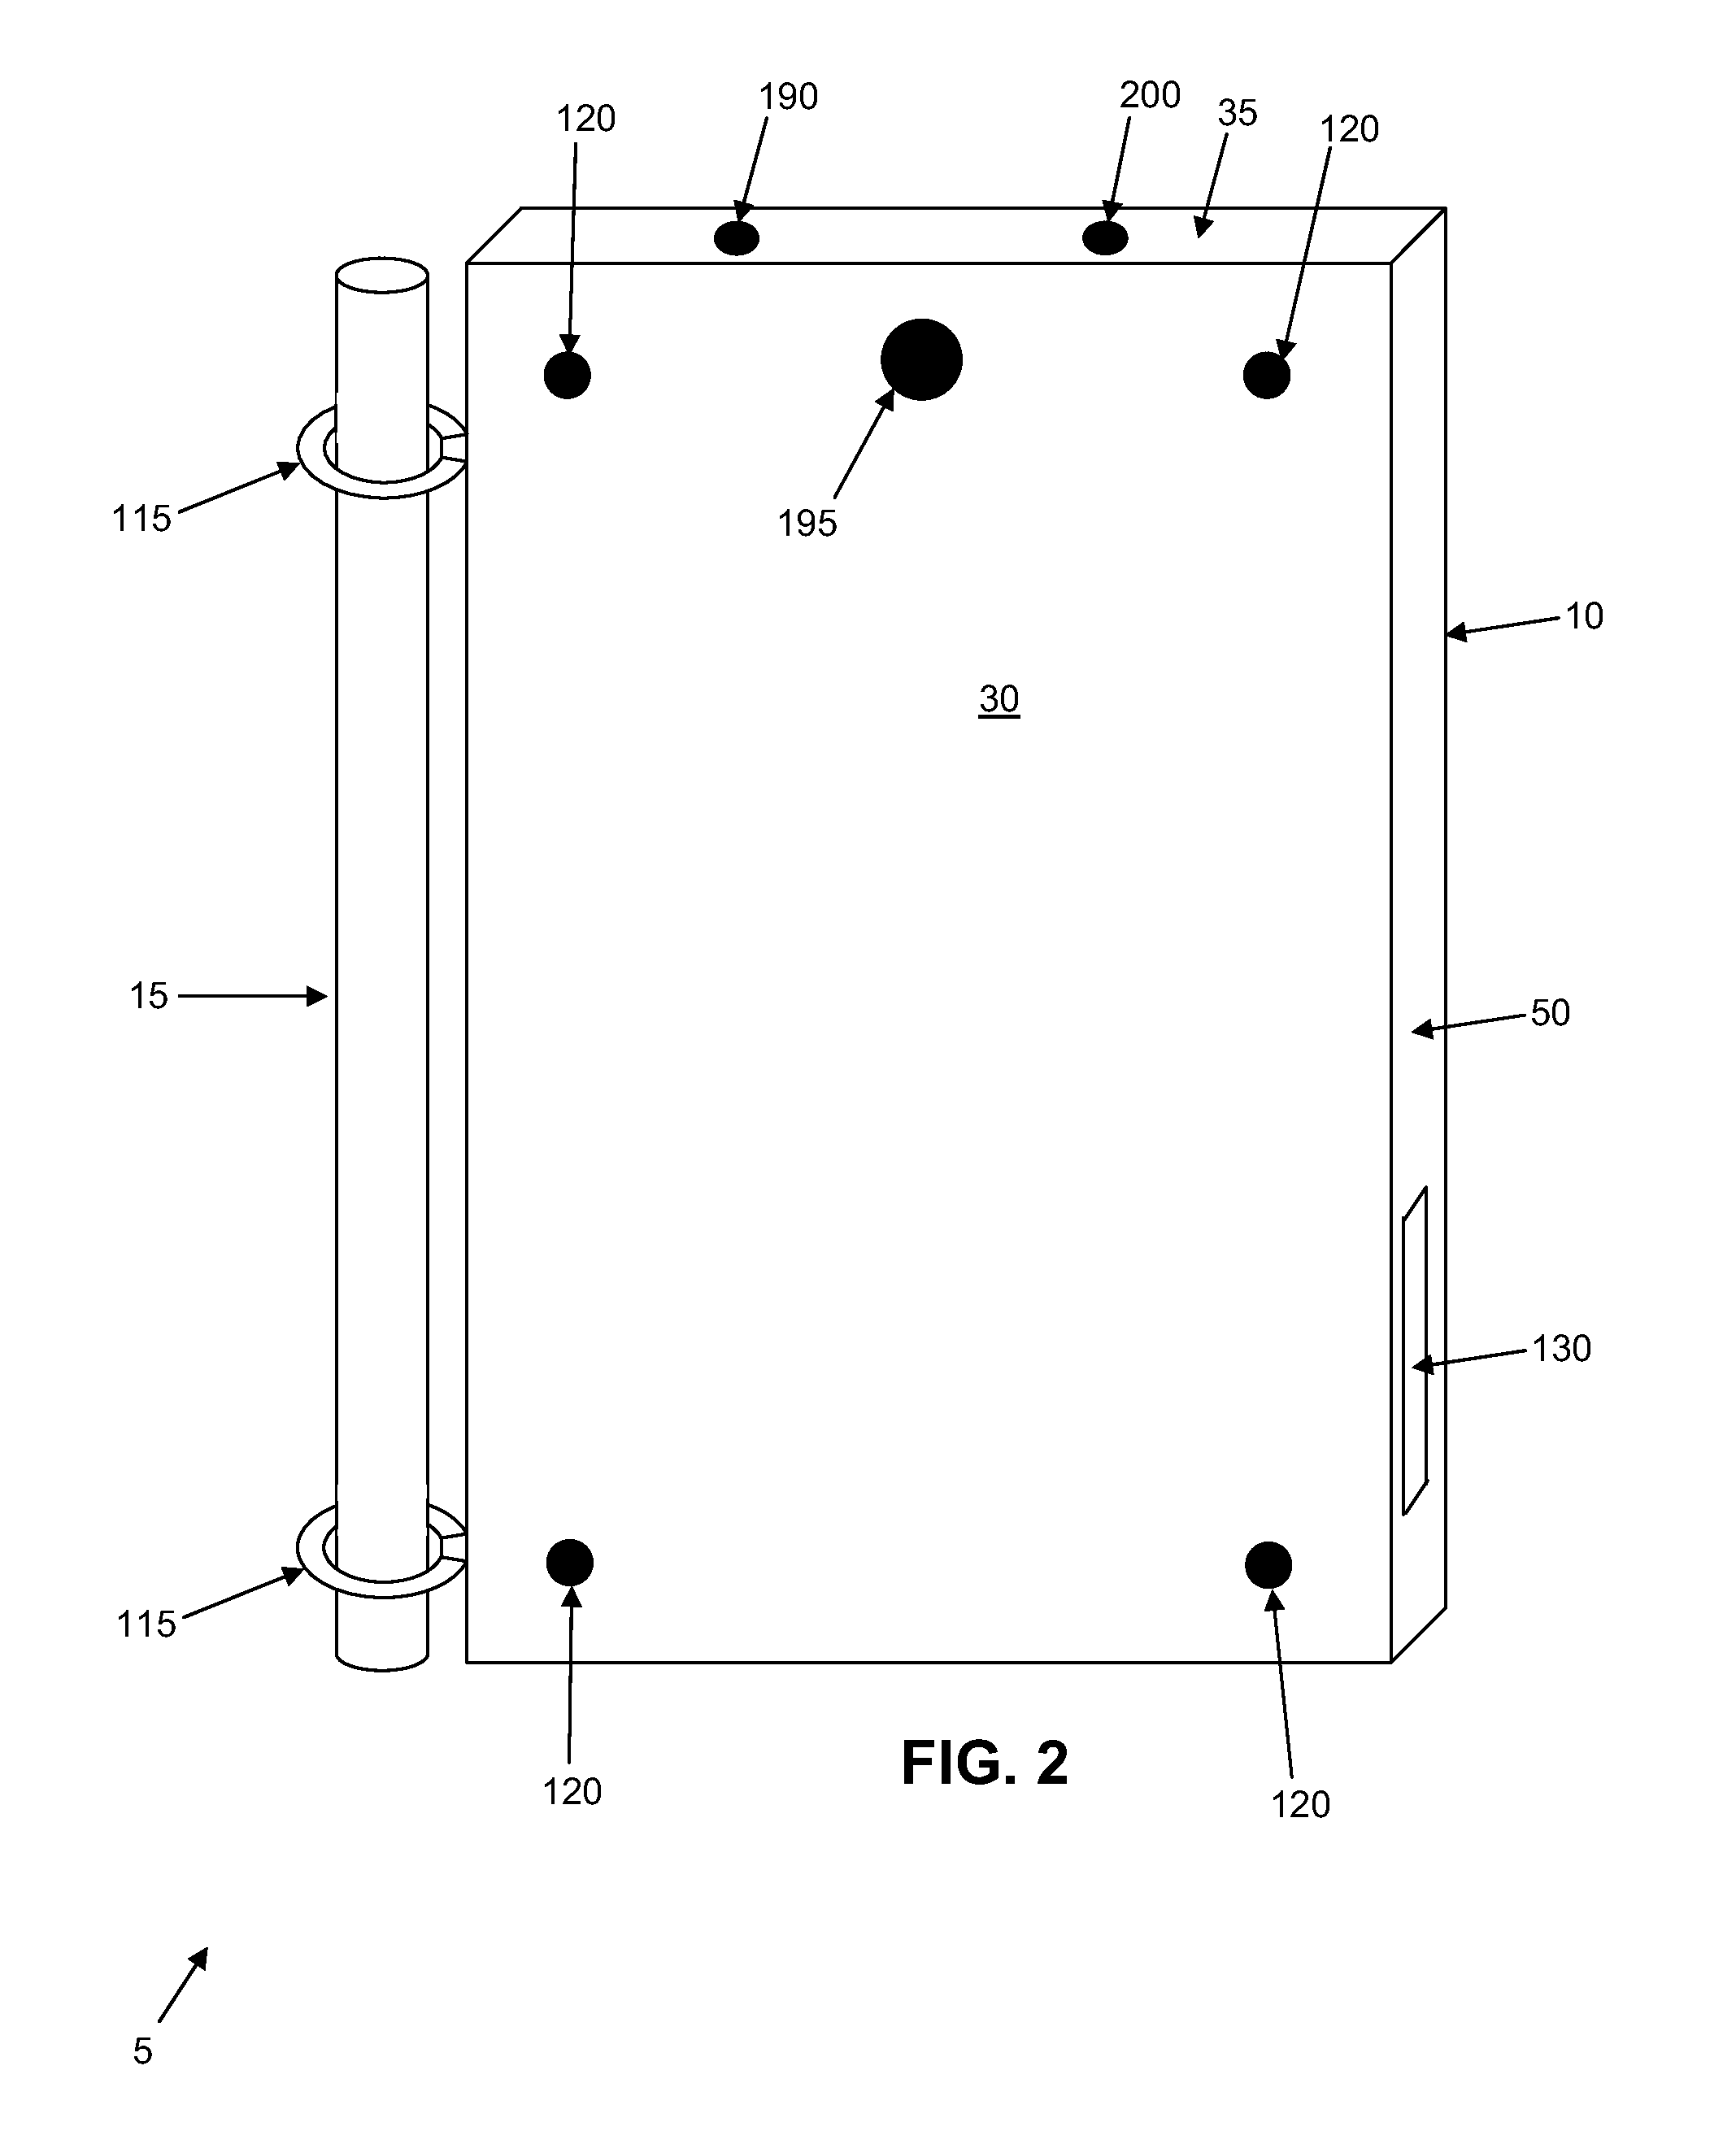 Integrated, hand-held apparatus and associated method for acquiring diagnostic and prognostic information from a patient at the bedside or at some other patient location